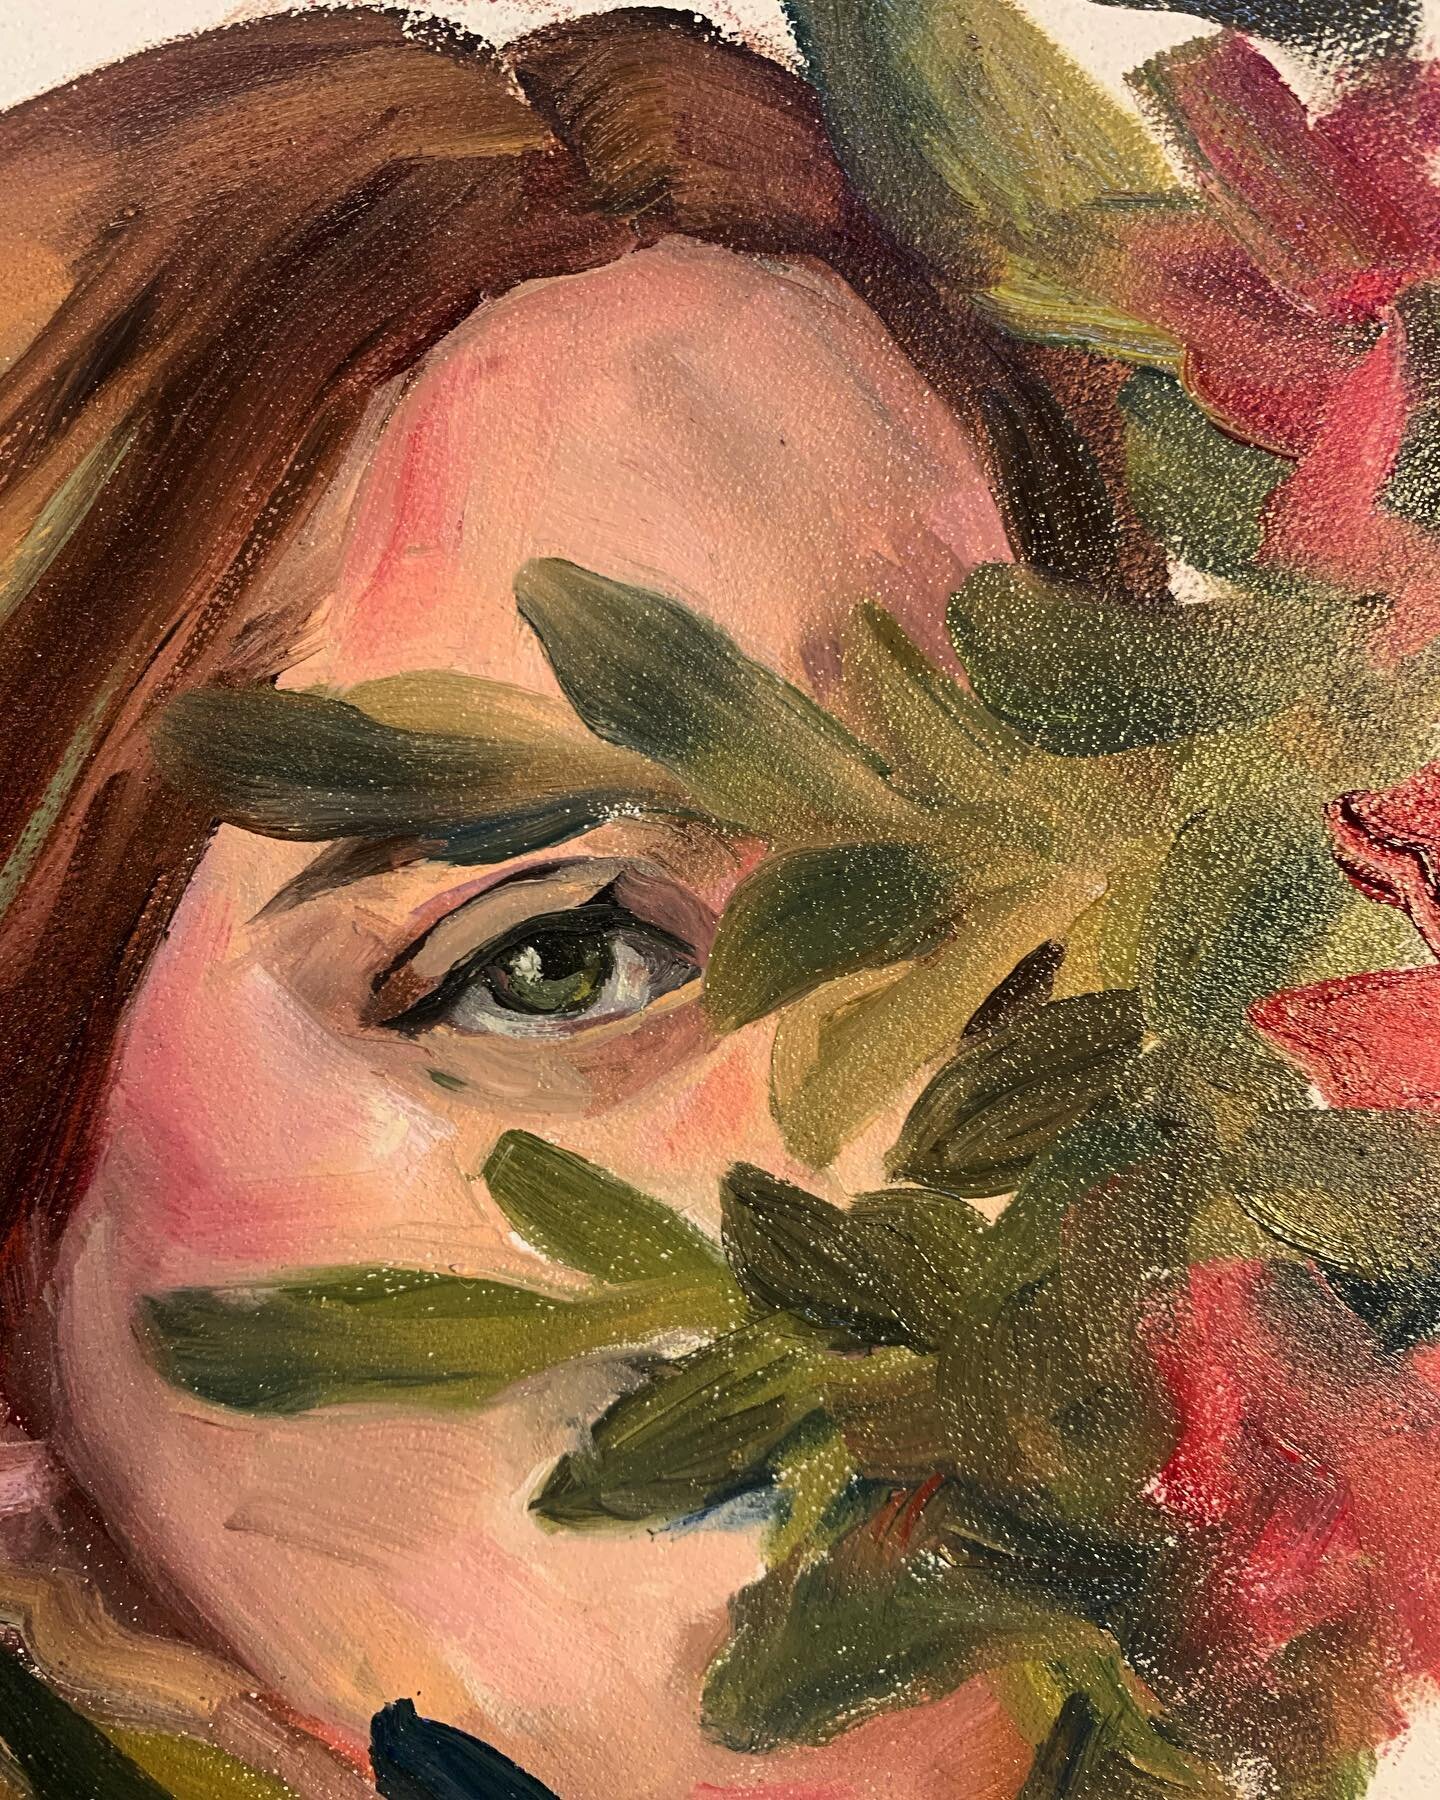 my studio updates are finally finished and I&rsquo;m super excited to be getting back to work 🚨🚨🚨
.
.
.
Tags: #art #arts #artist #artwork #artworks #arte #draw #drawing #drawings #painting #process #portrait #wip #oilpainting #oilpaint  #illustrat